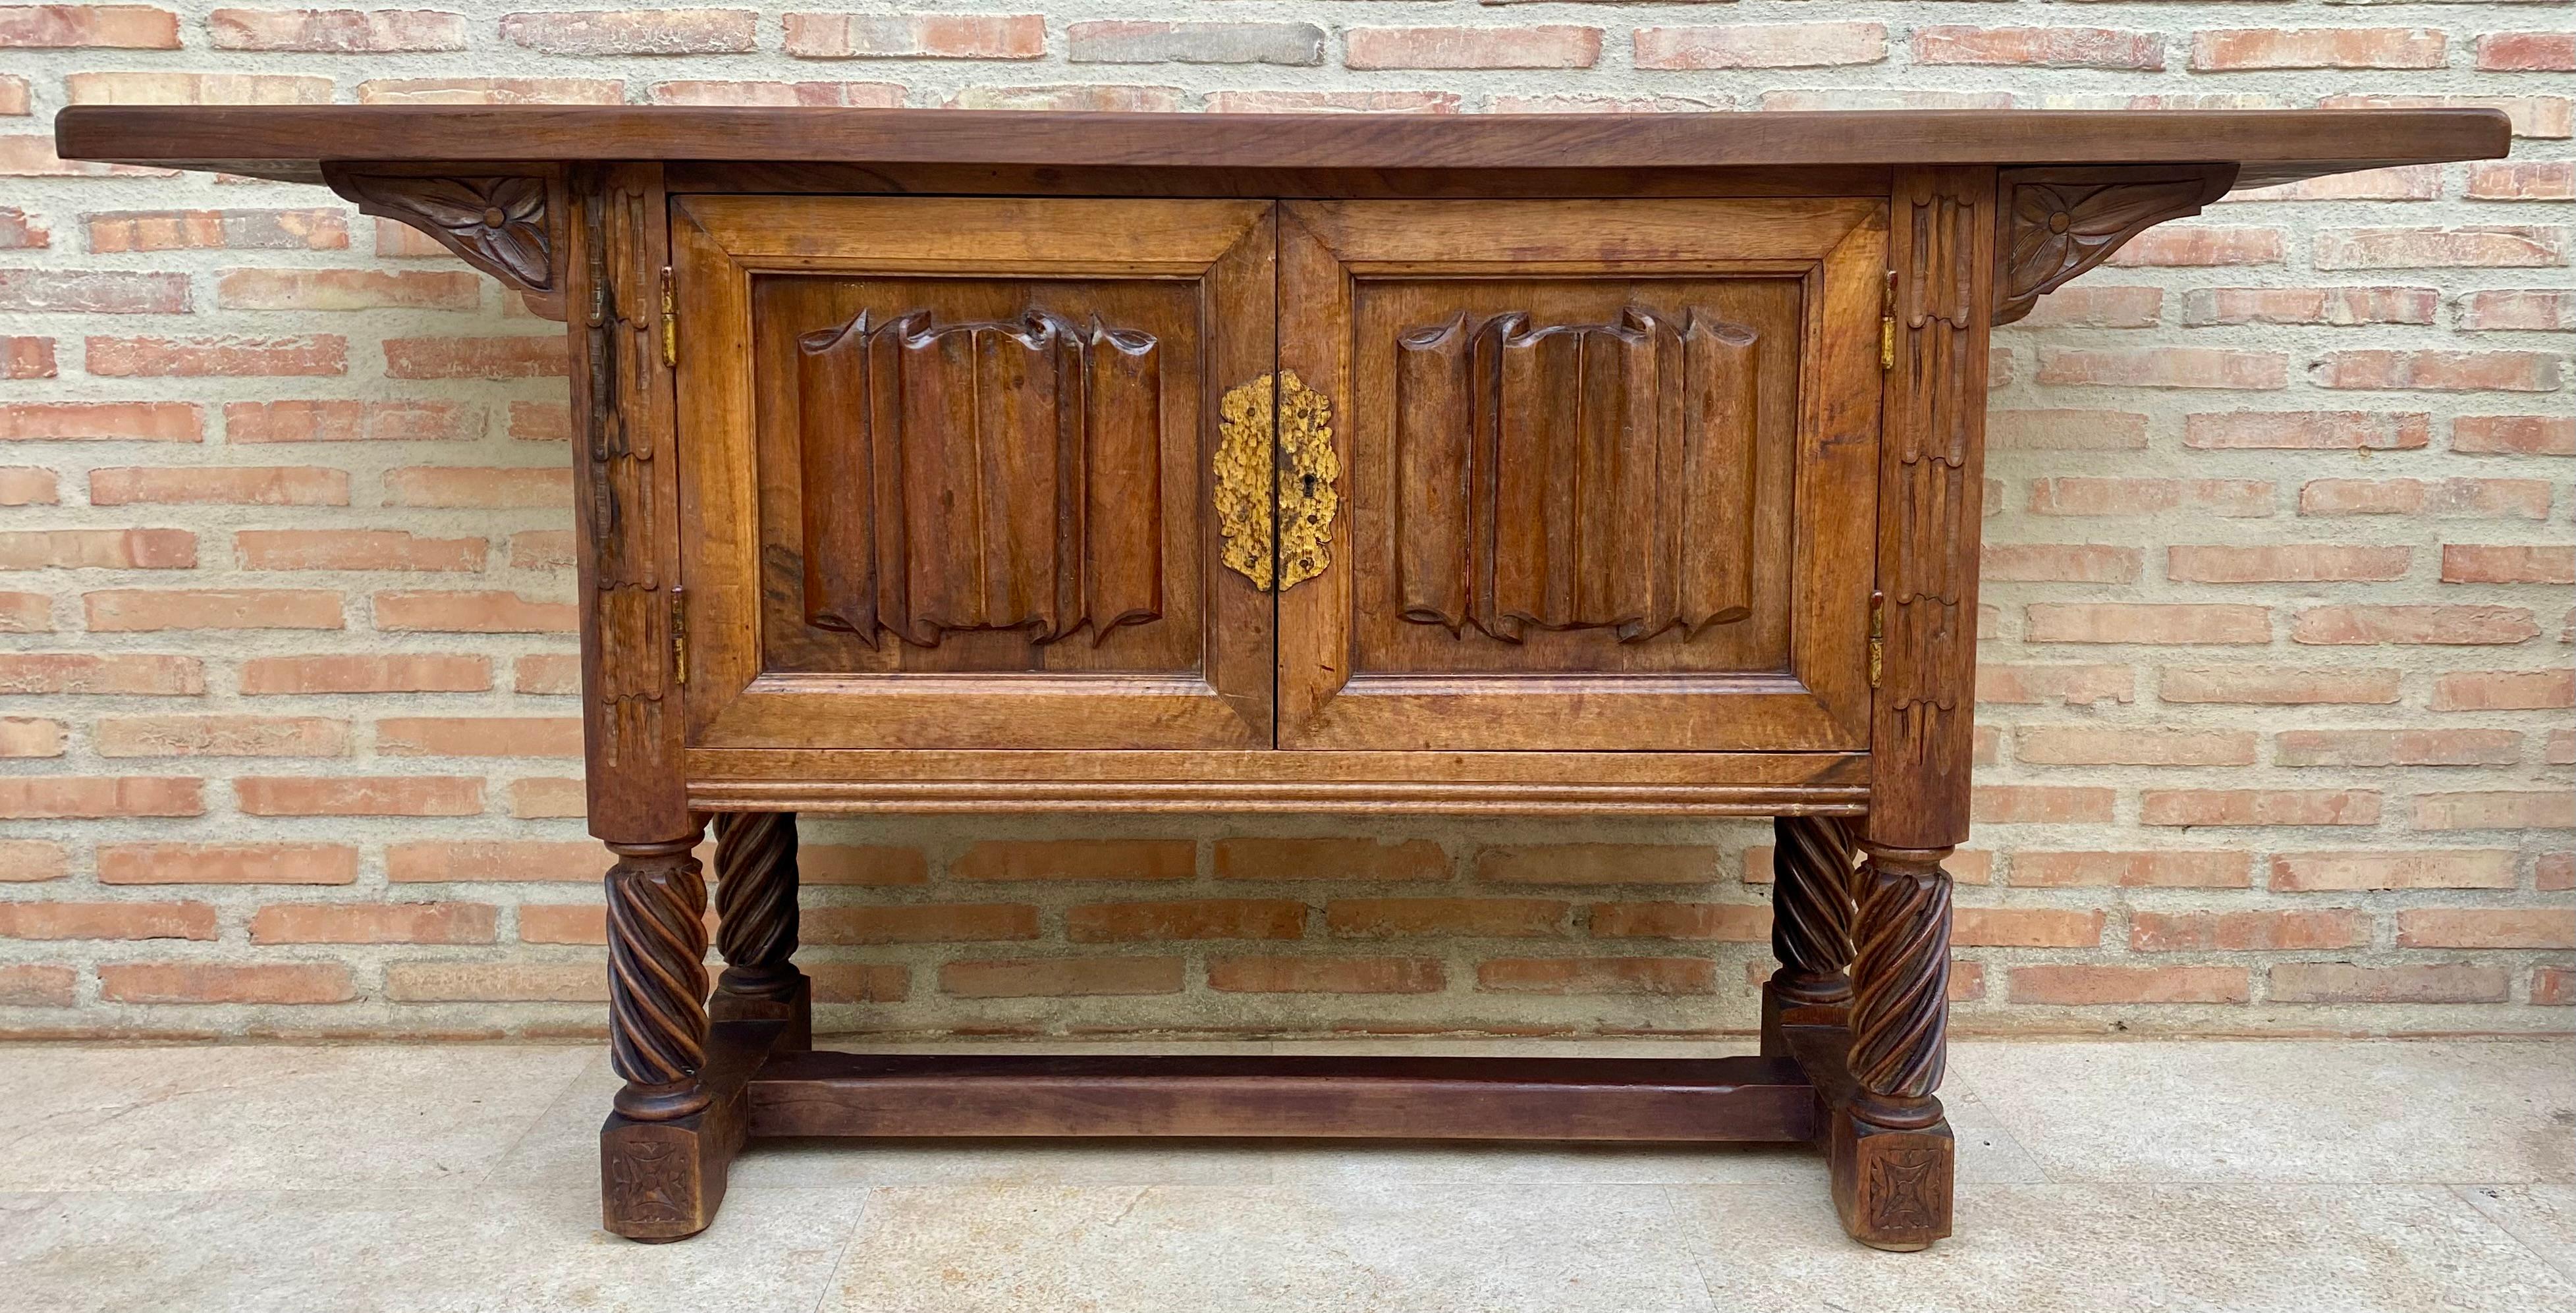 Very good quality carved Spanish console, circa 1940. Beautifully carved from walnut, with good color and patina. It features two carved panels on the doors, with carved leaf decoration. The piece has decorated side pilasters and a double-door